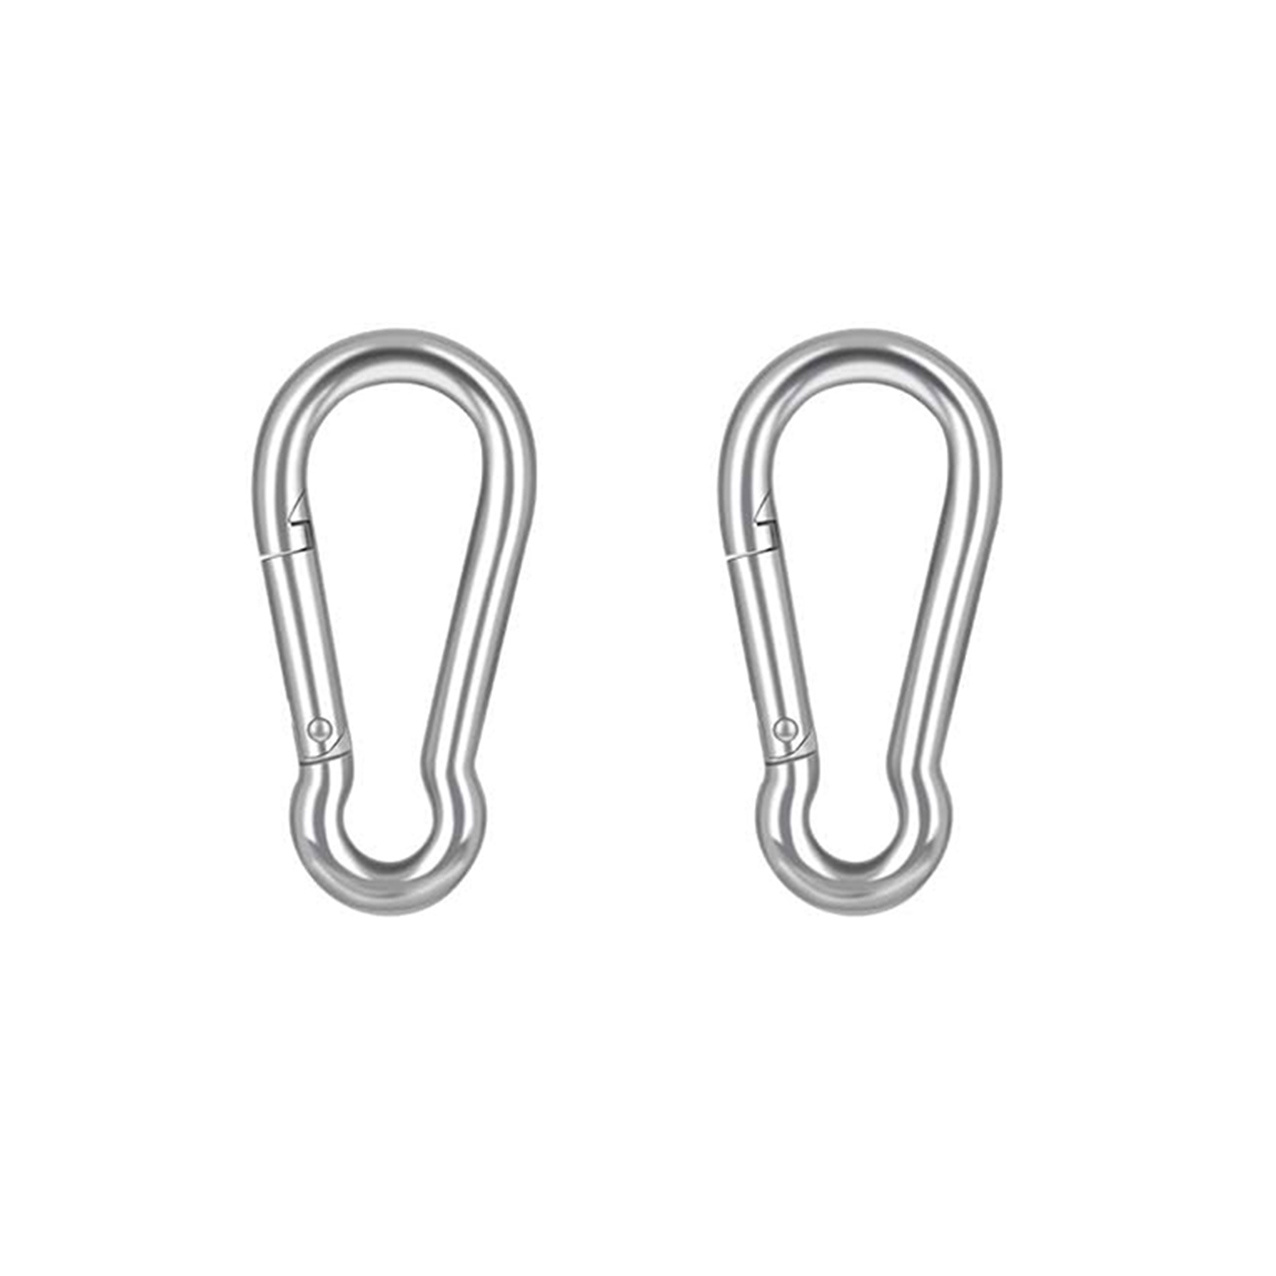 10pcs Snap Hook Stainless Steel Safety Rope Spring Carabiner